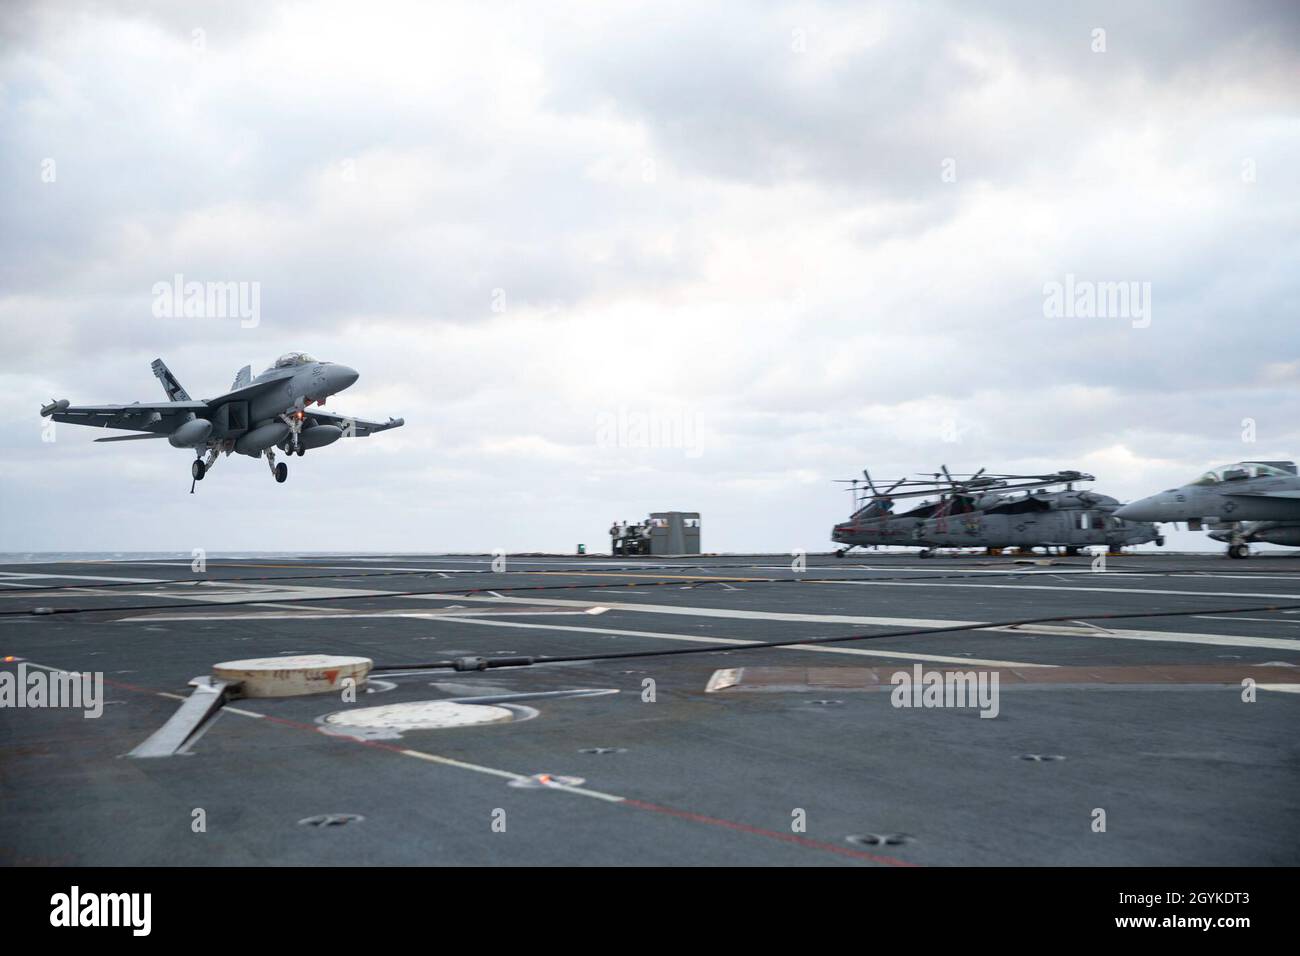 ATLANTIC OCEAN (Jan. 17, 2020) An EA-18G Growler, assigned to Air Test and Evaluation Squadron (VX) 23, approaches USS Gerald R. Ford's (CVN 78) flight deck. Ford is currently conducting Aircraft Compatibility Testing to further test its Electromagnetic Aircraft Launch Systems (EMALS) and Advanced Arresting Gear (AAG). (U.S. Navy photo by Mass Communication Specialist Seaman Zack Guth) Stock Photo